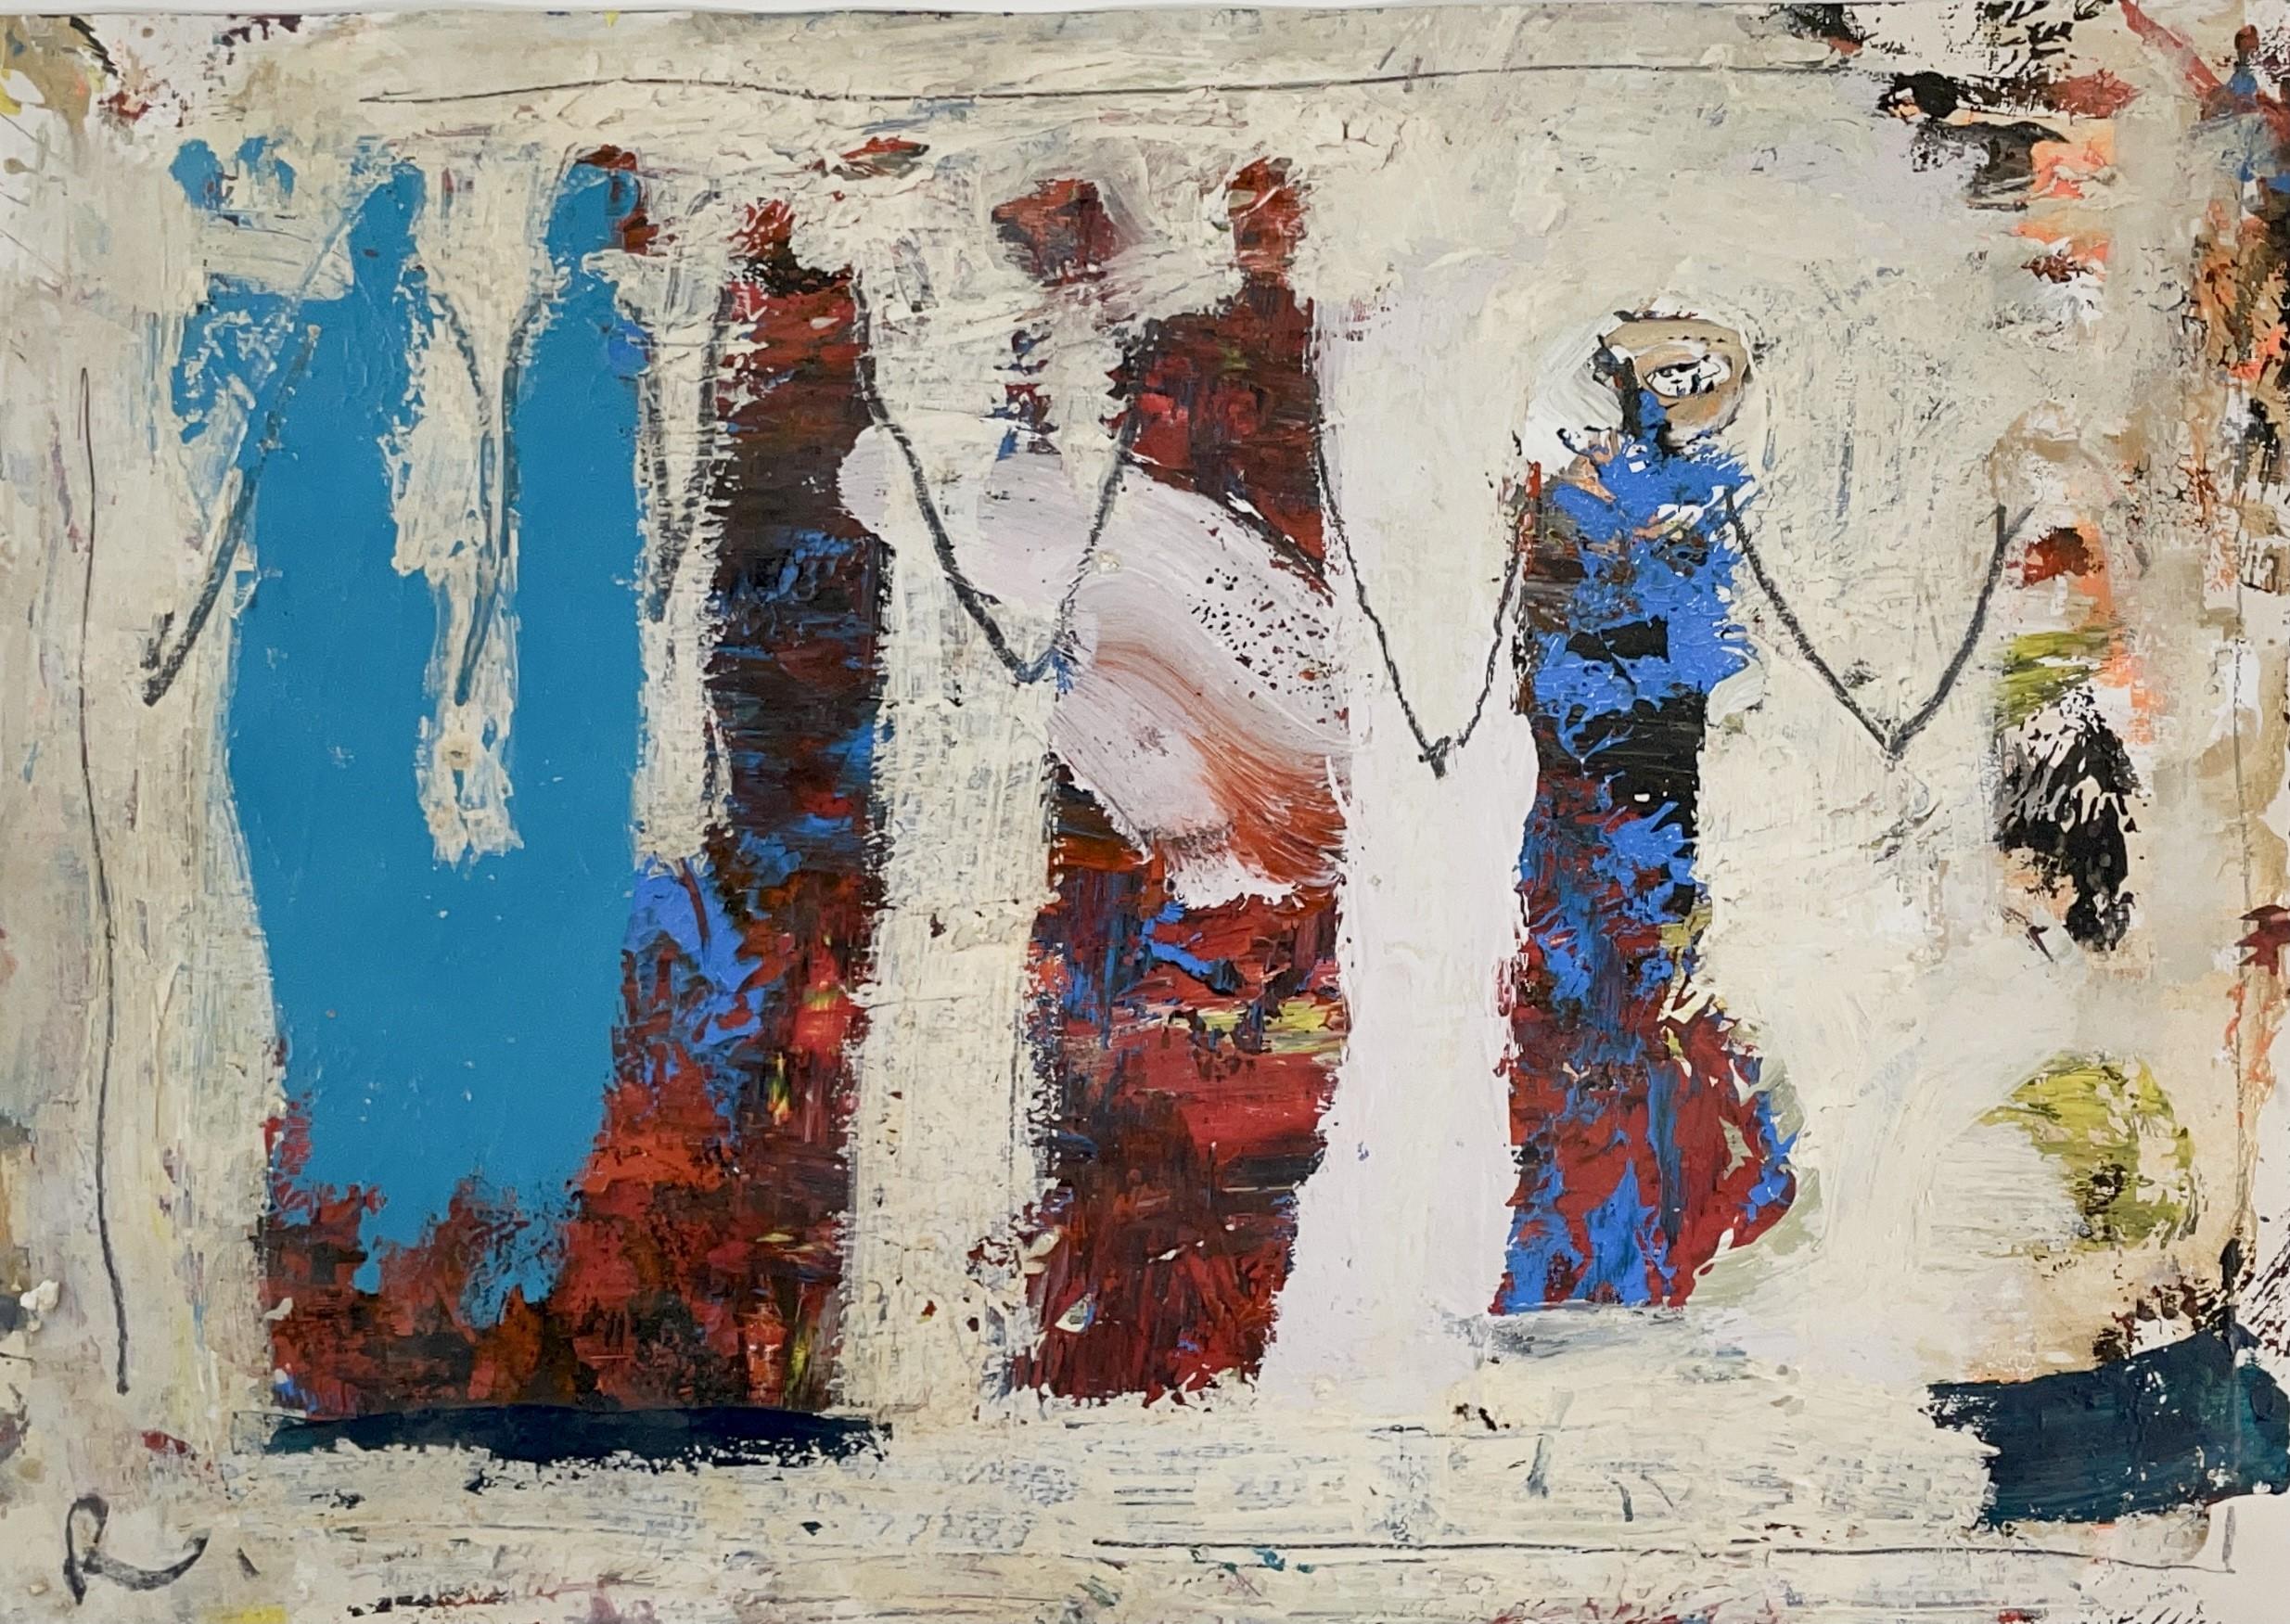 Paul wadsworth Figurative Painting - "Village Girls". Mixed Media Abstract Expressionist Painting